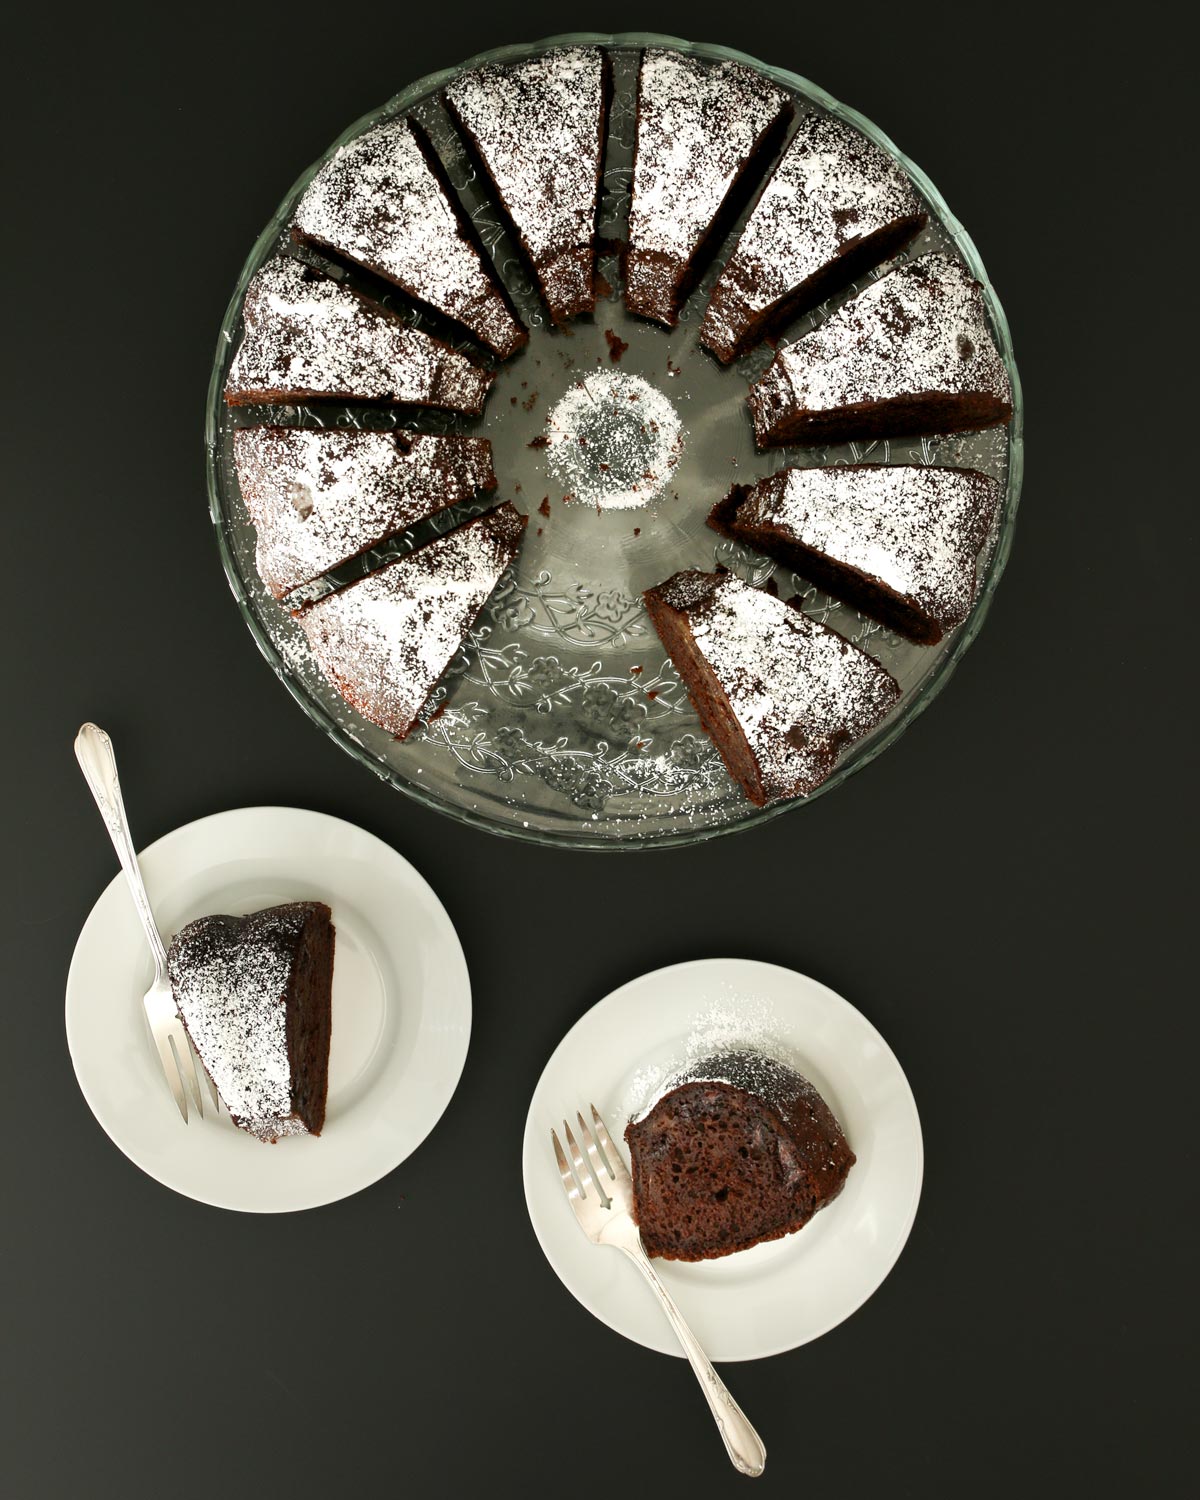 overhead shot of bundt cake on cake platter cut into slices and two plates with cake slices and forks.